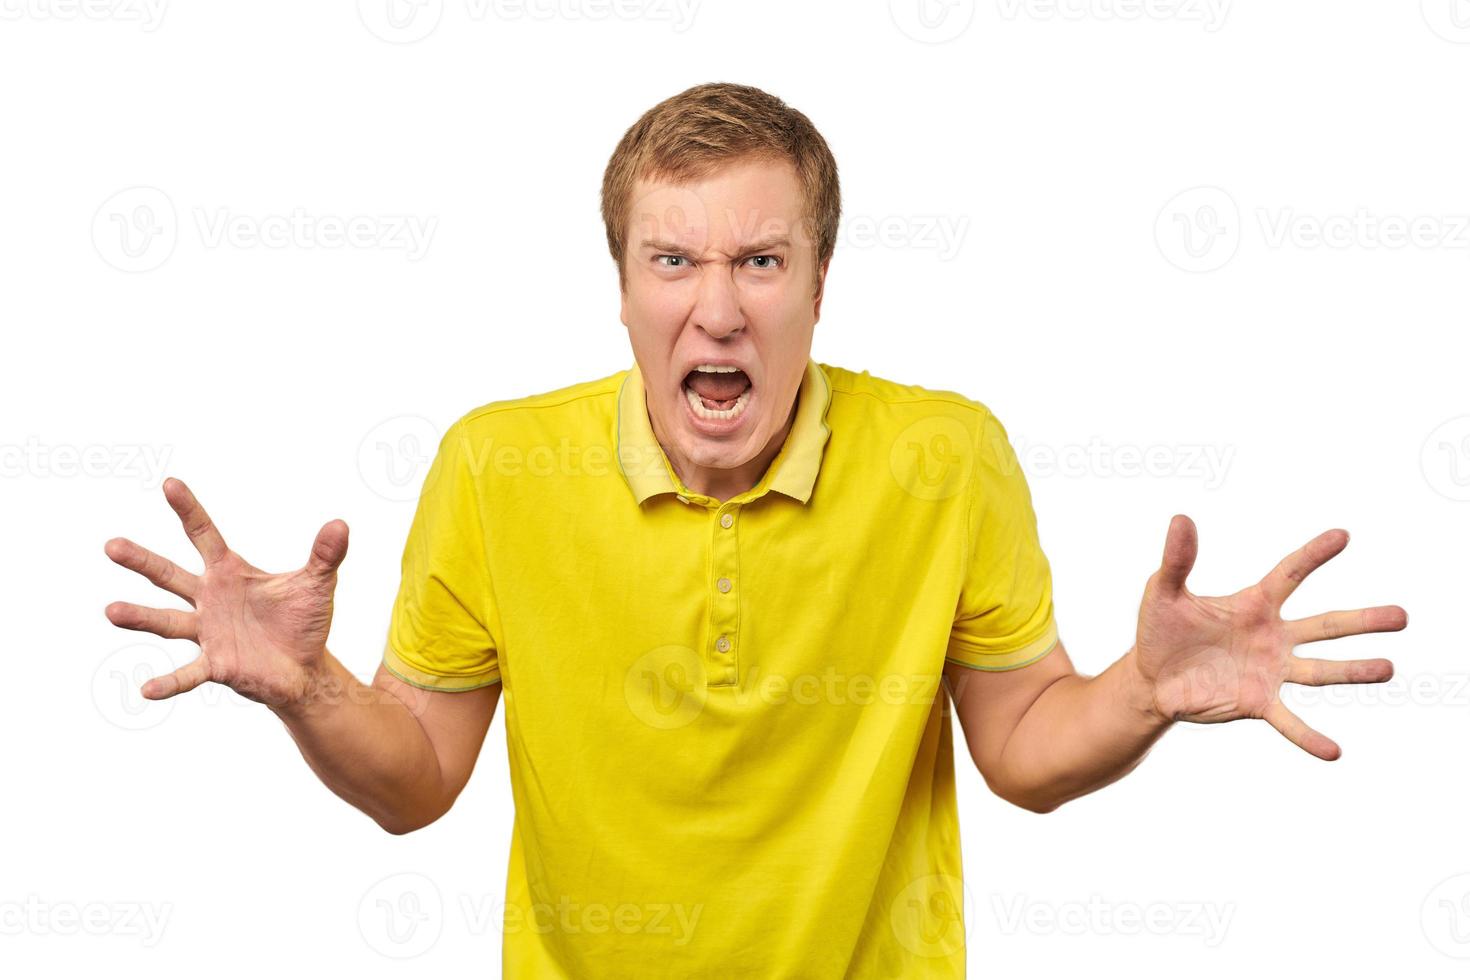 Angry young man in yellow T-shirt spread his hands and yelling isolated on white background photo